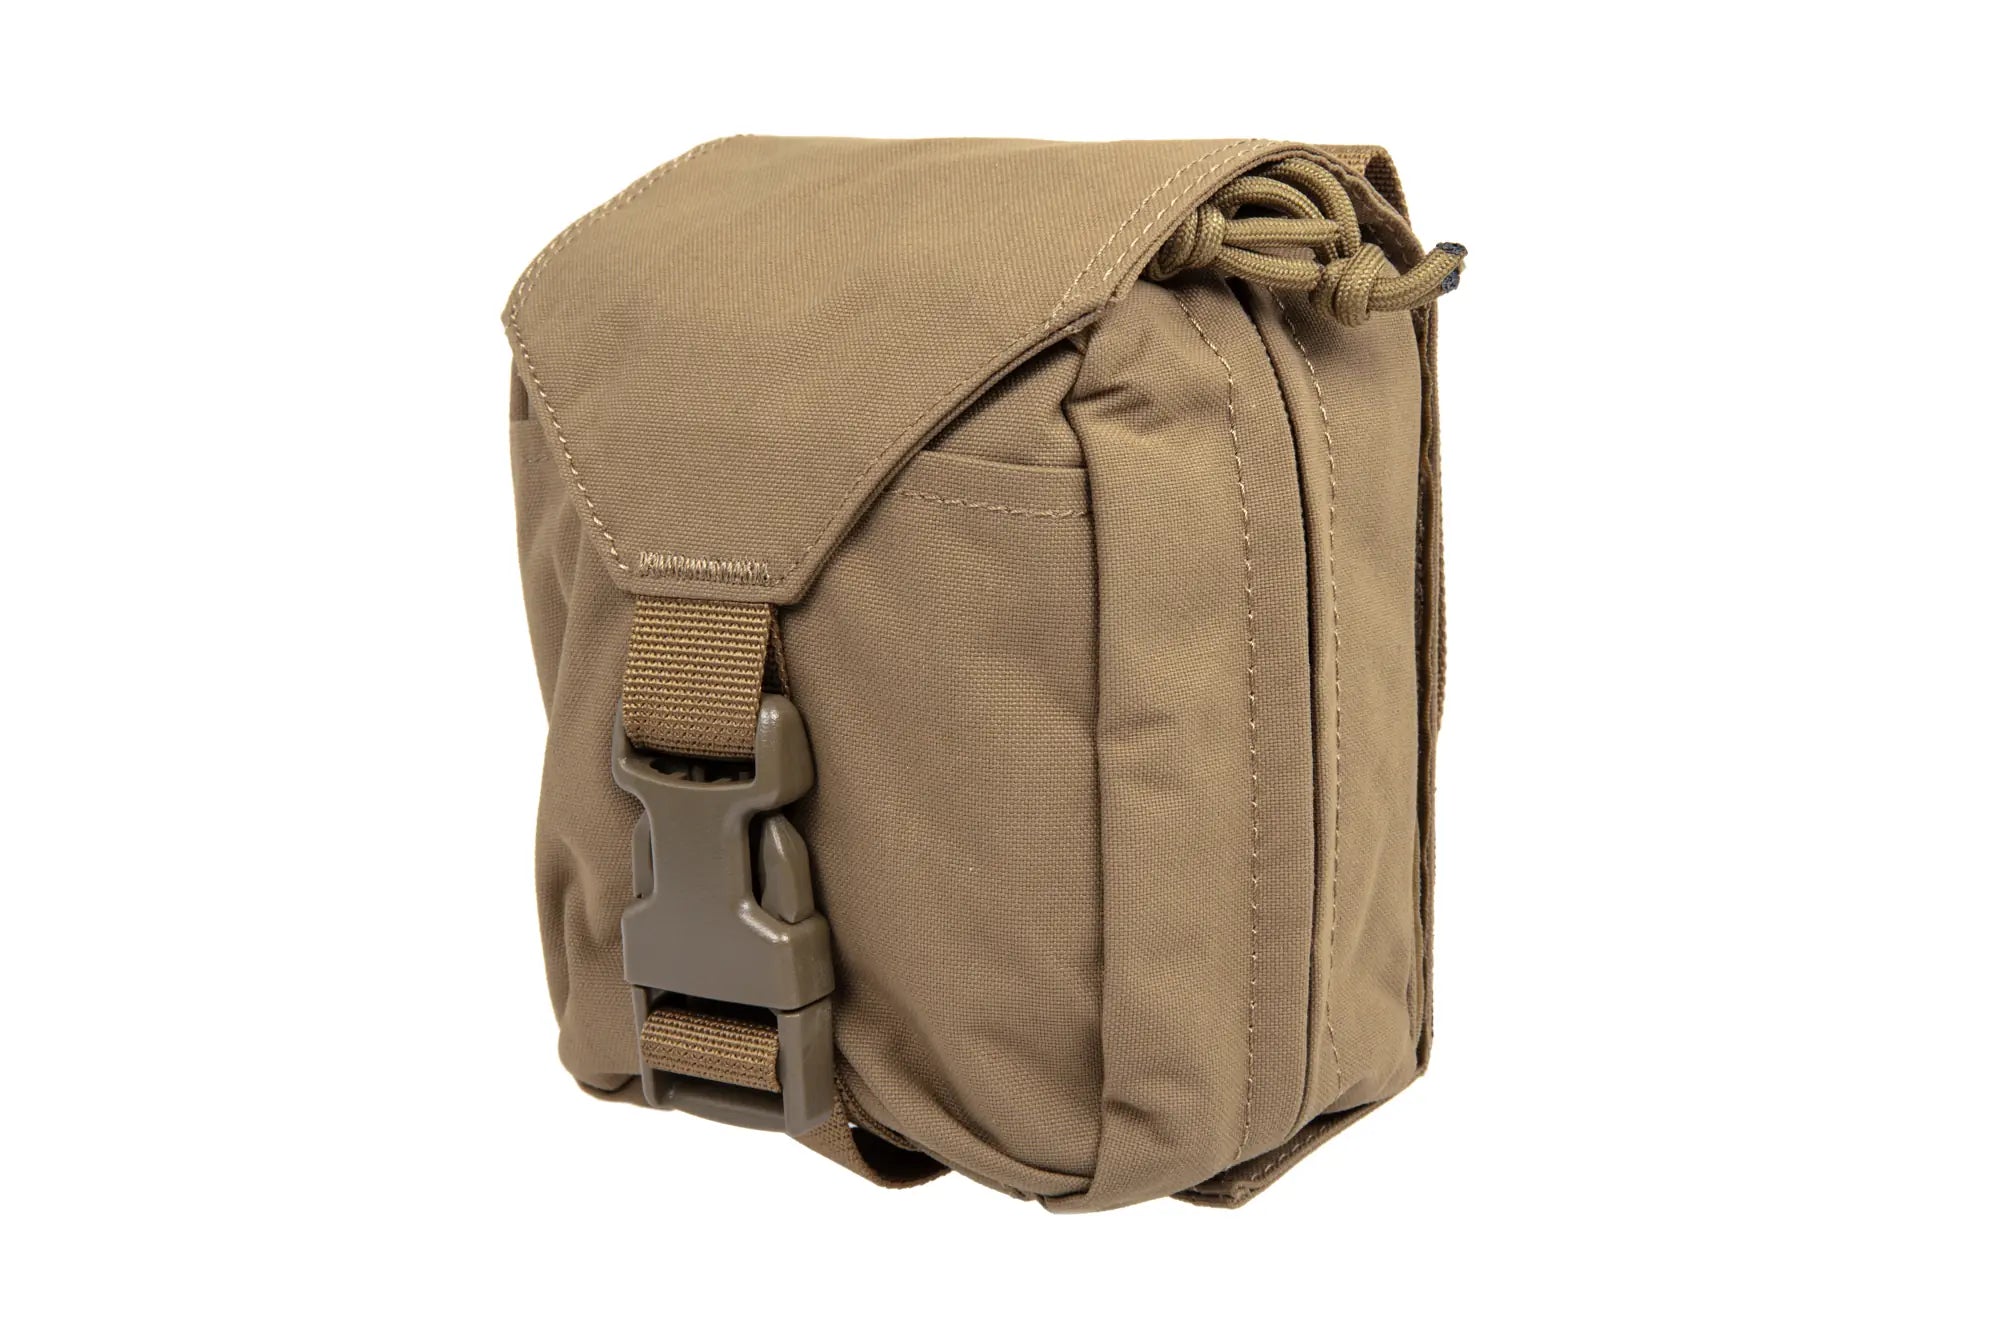 First aid kit with Molle panel Wosport Coyote Brown